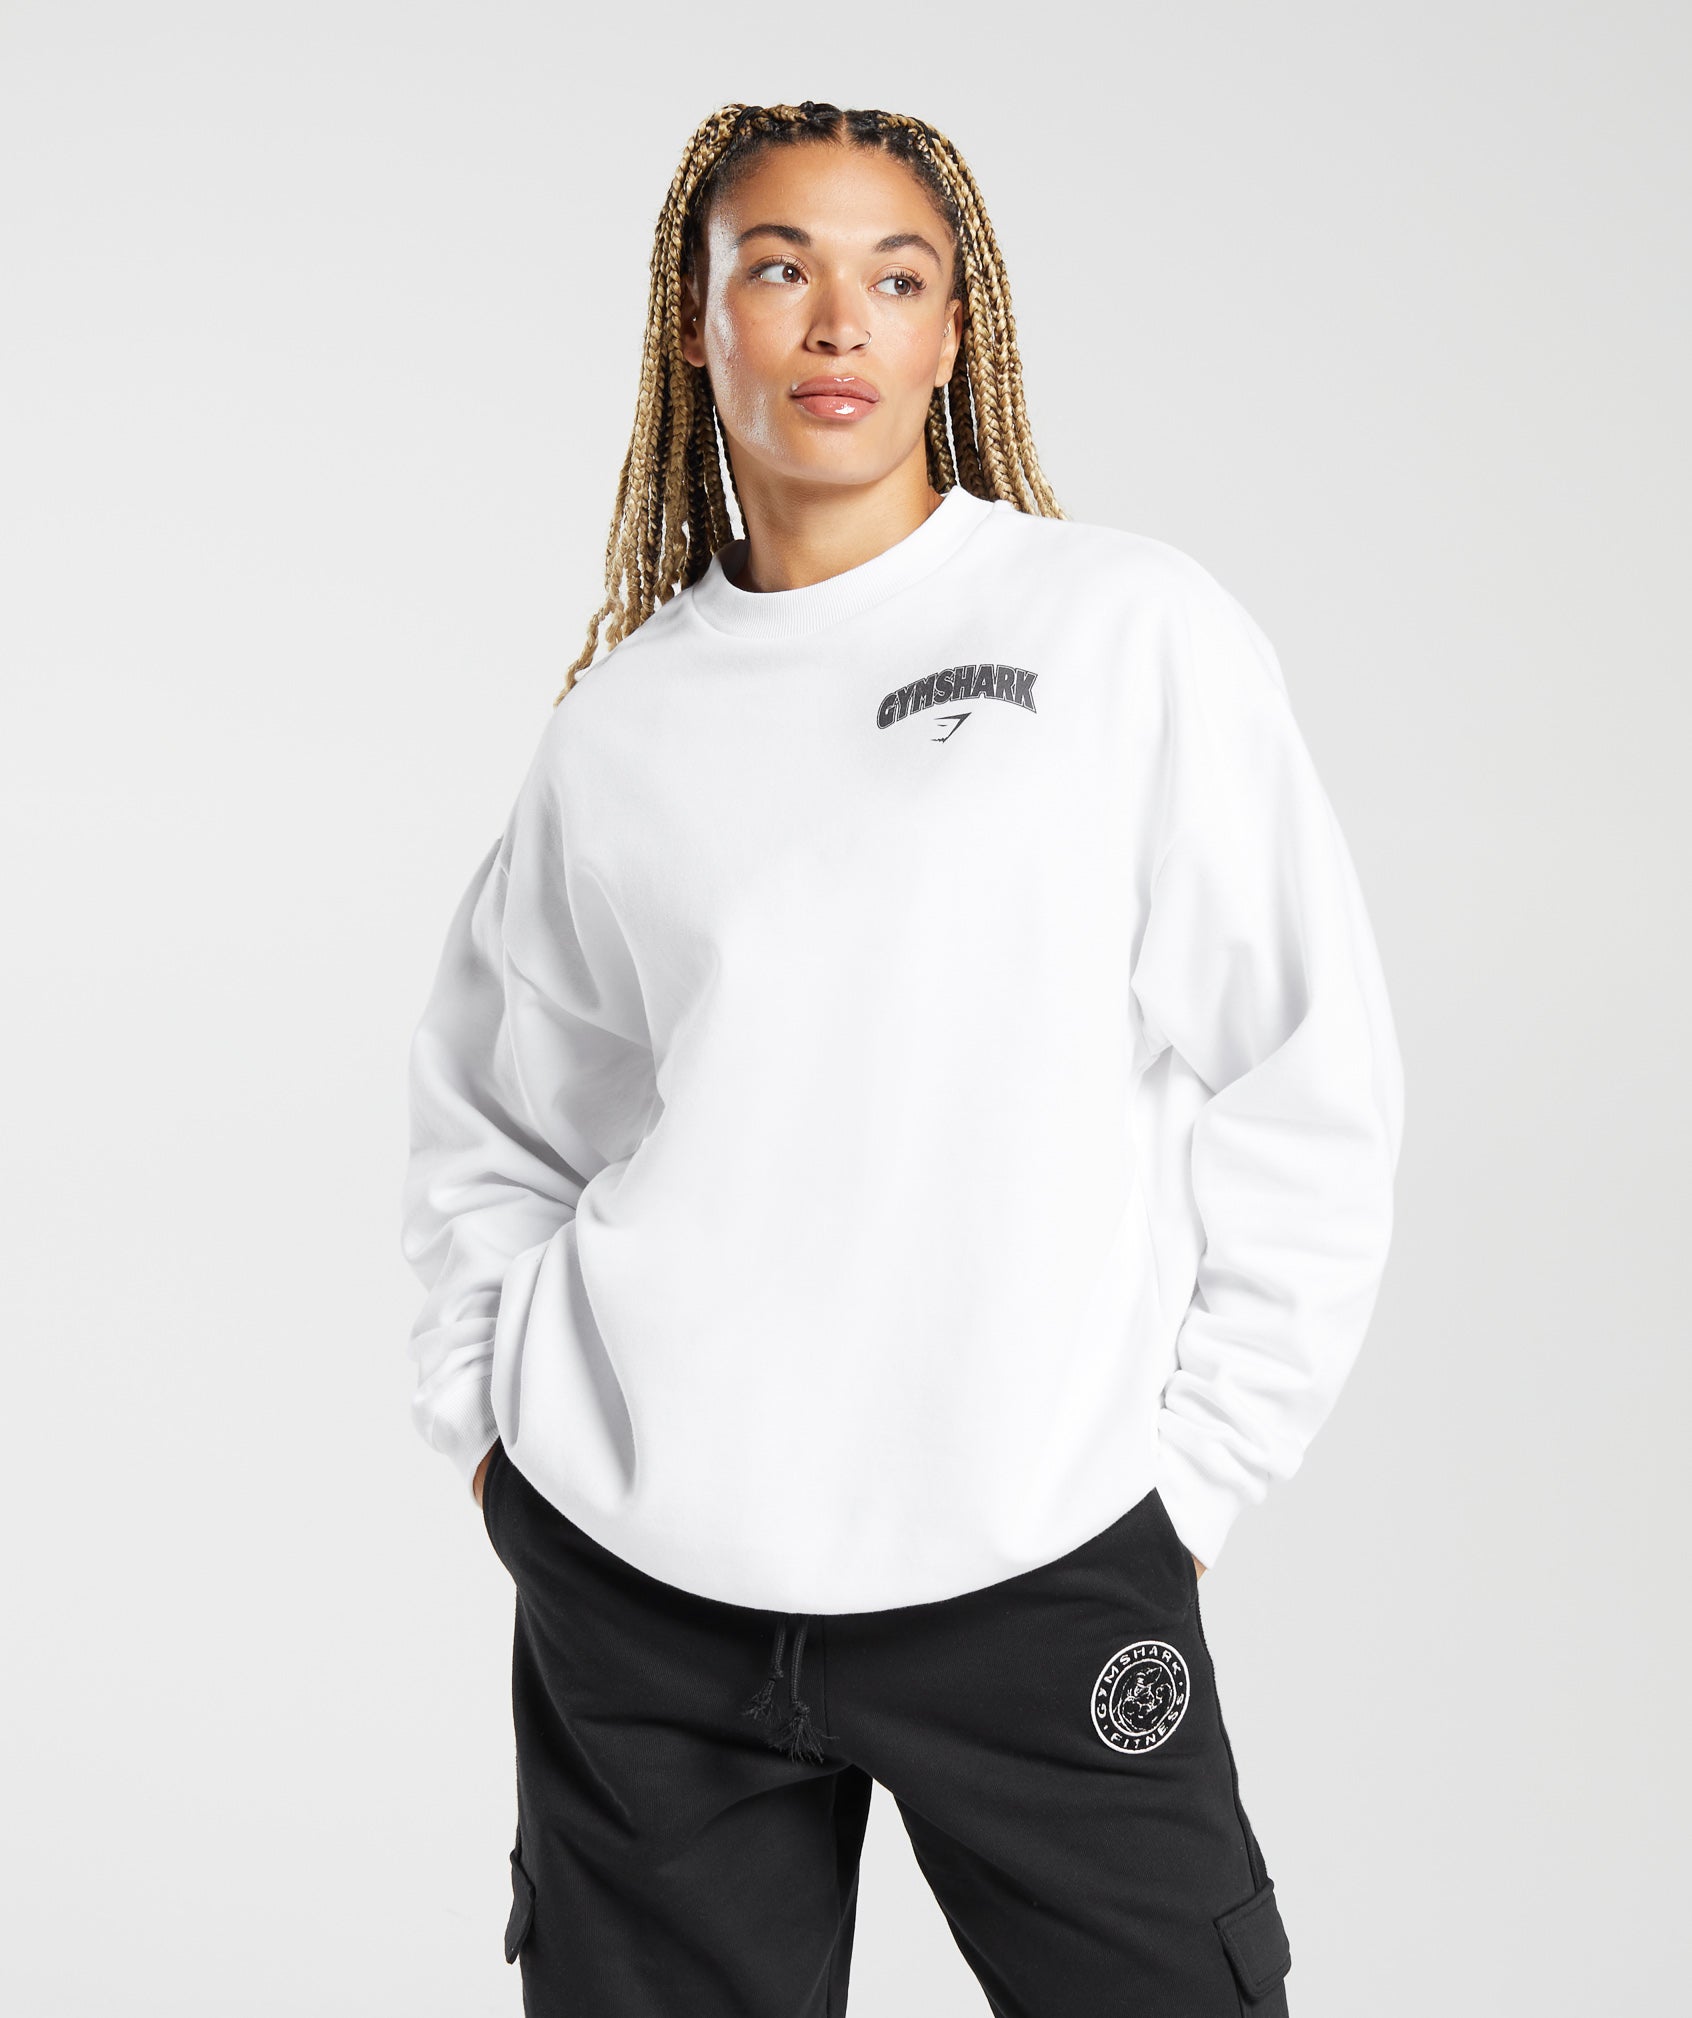 Lifting Apparel Oversized Sweatshirt in White - view 2